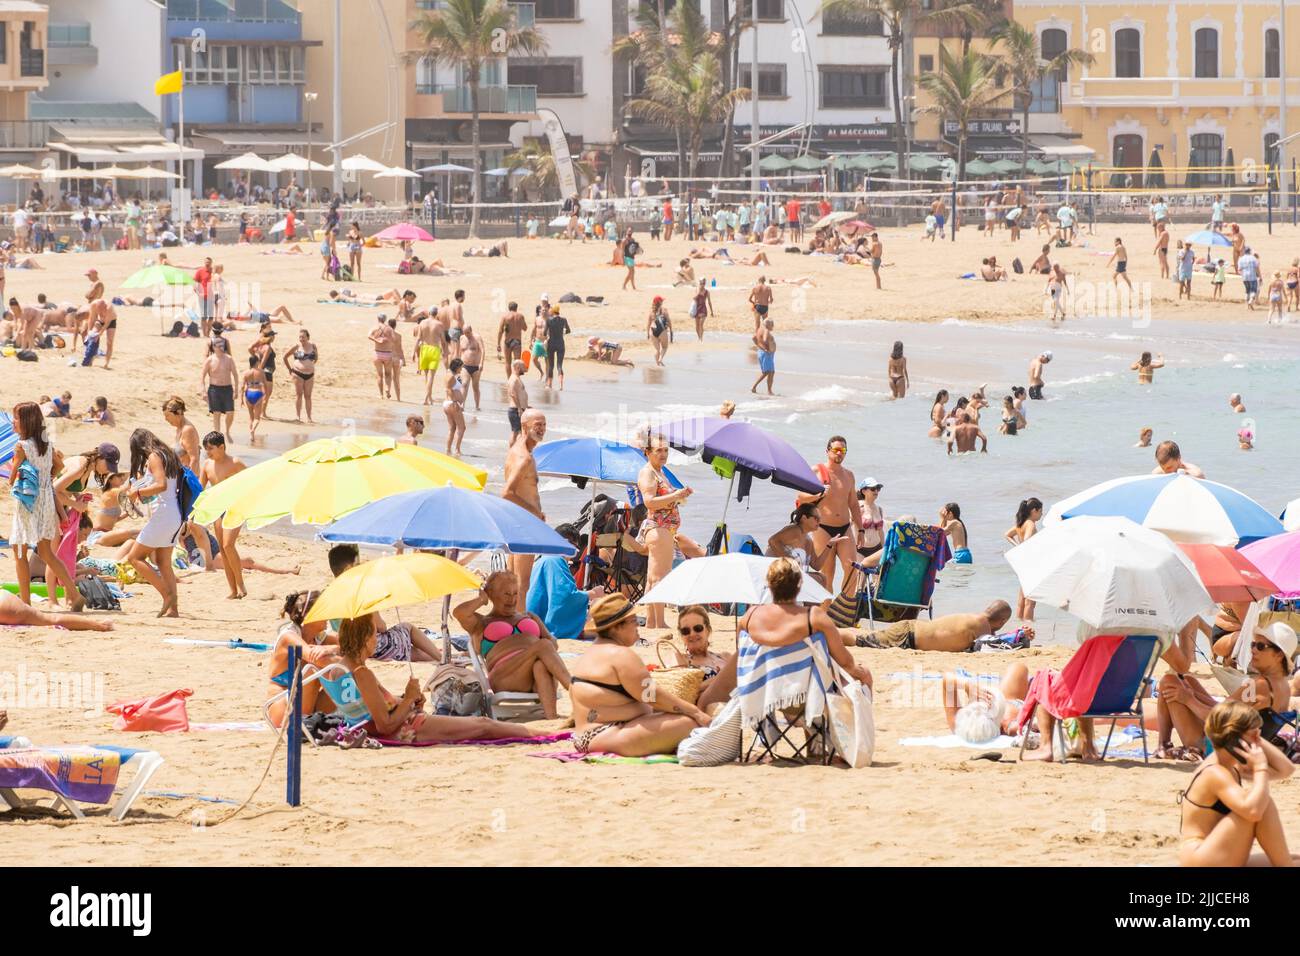 Las Palmas, Gran Canaria, Canary Islands, Spain. 25th July, 2022. Tourists, many from the UK, bask on the city beach in Las Palmas as temperatures hover around 40 degrees Celcius in some places on Gran Canaria during the current heatwave . Credit: Alan Dawson/ Alamy Live News. Stock Photo